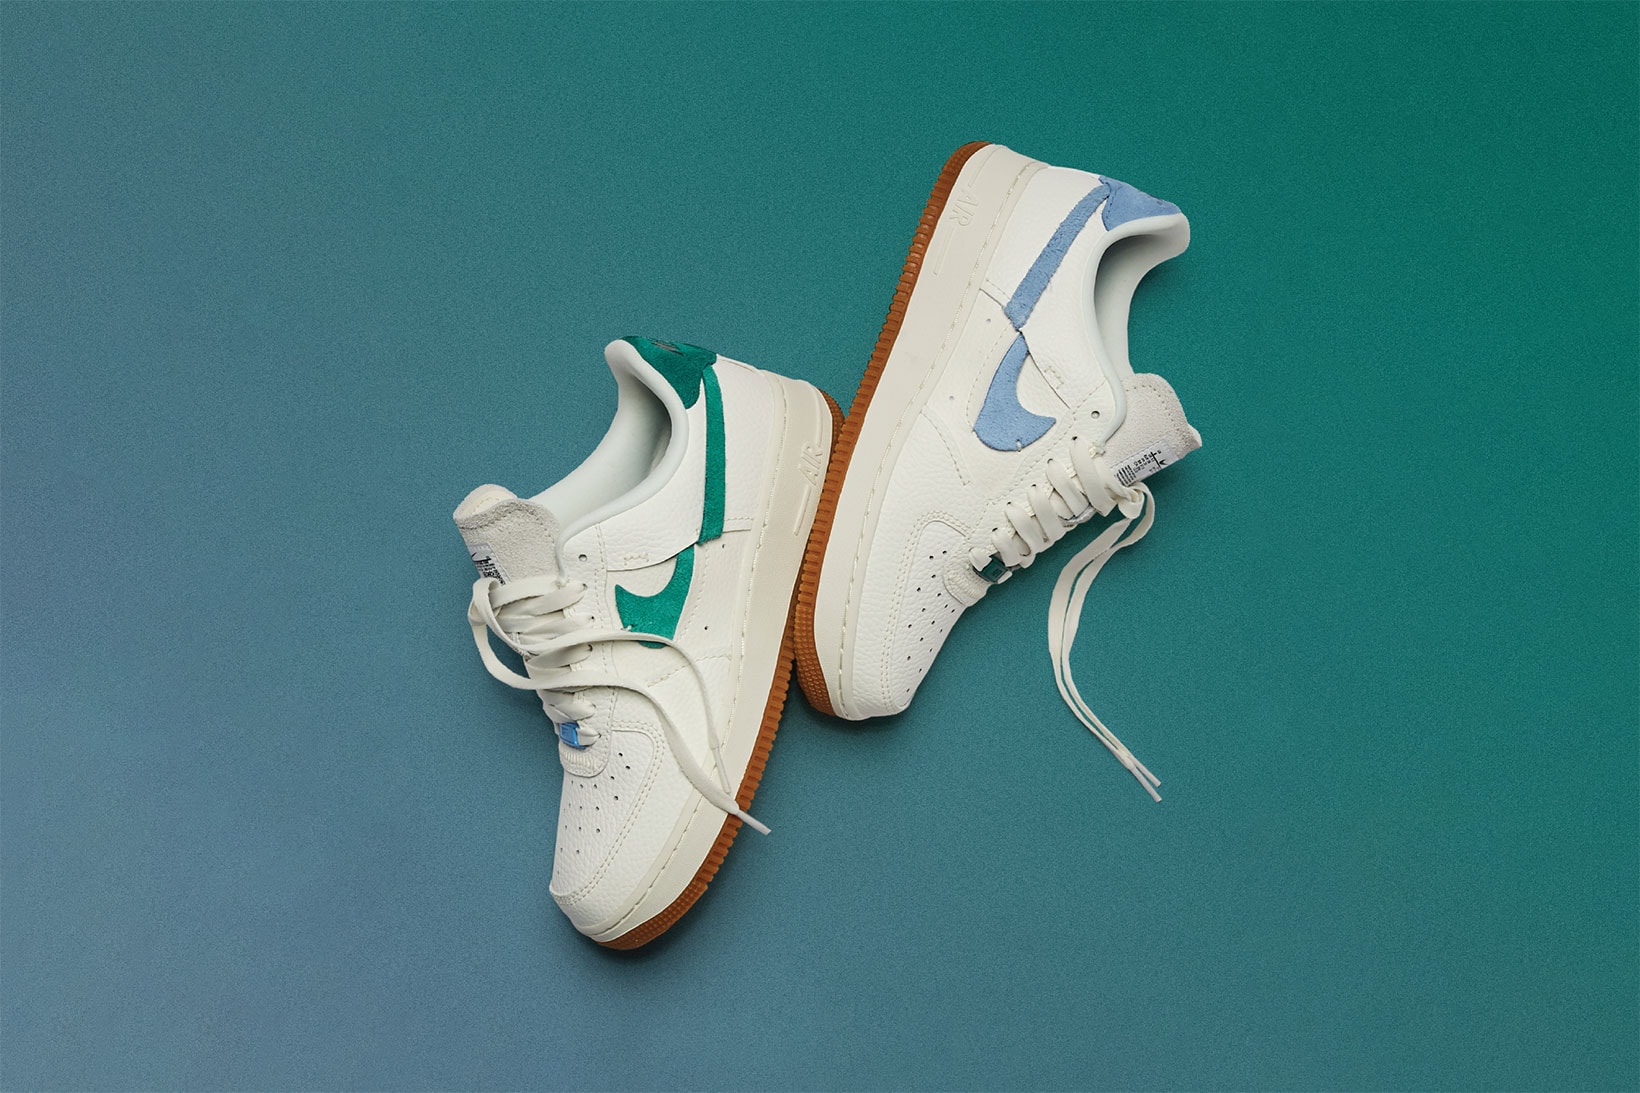 nike air force 1 07 lxx deconstructed womens sneakers green light blue white shoes footwear sneakerhead